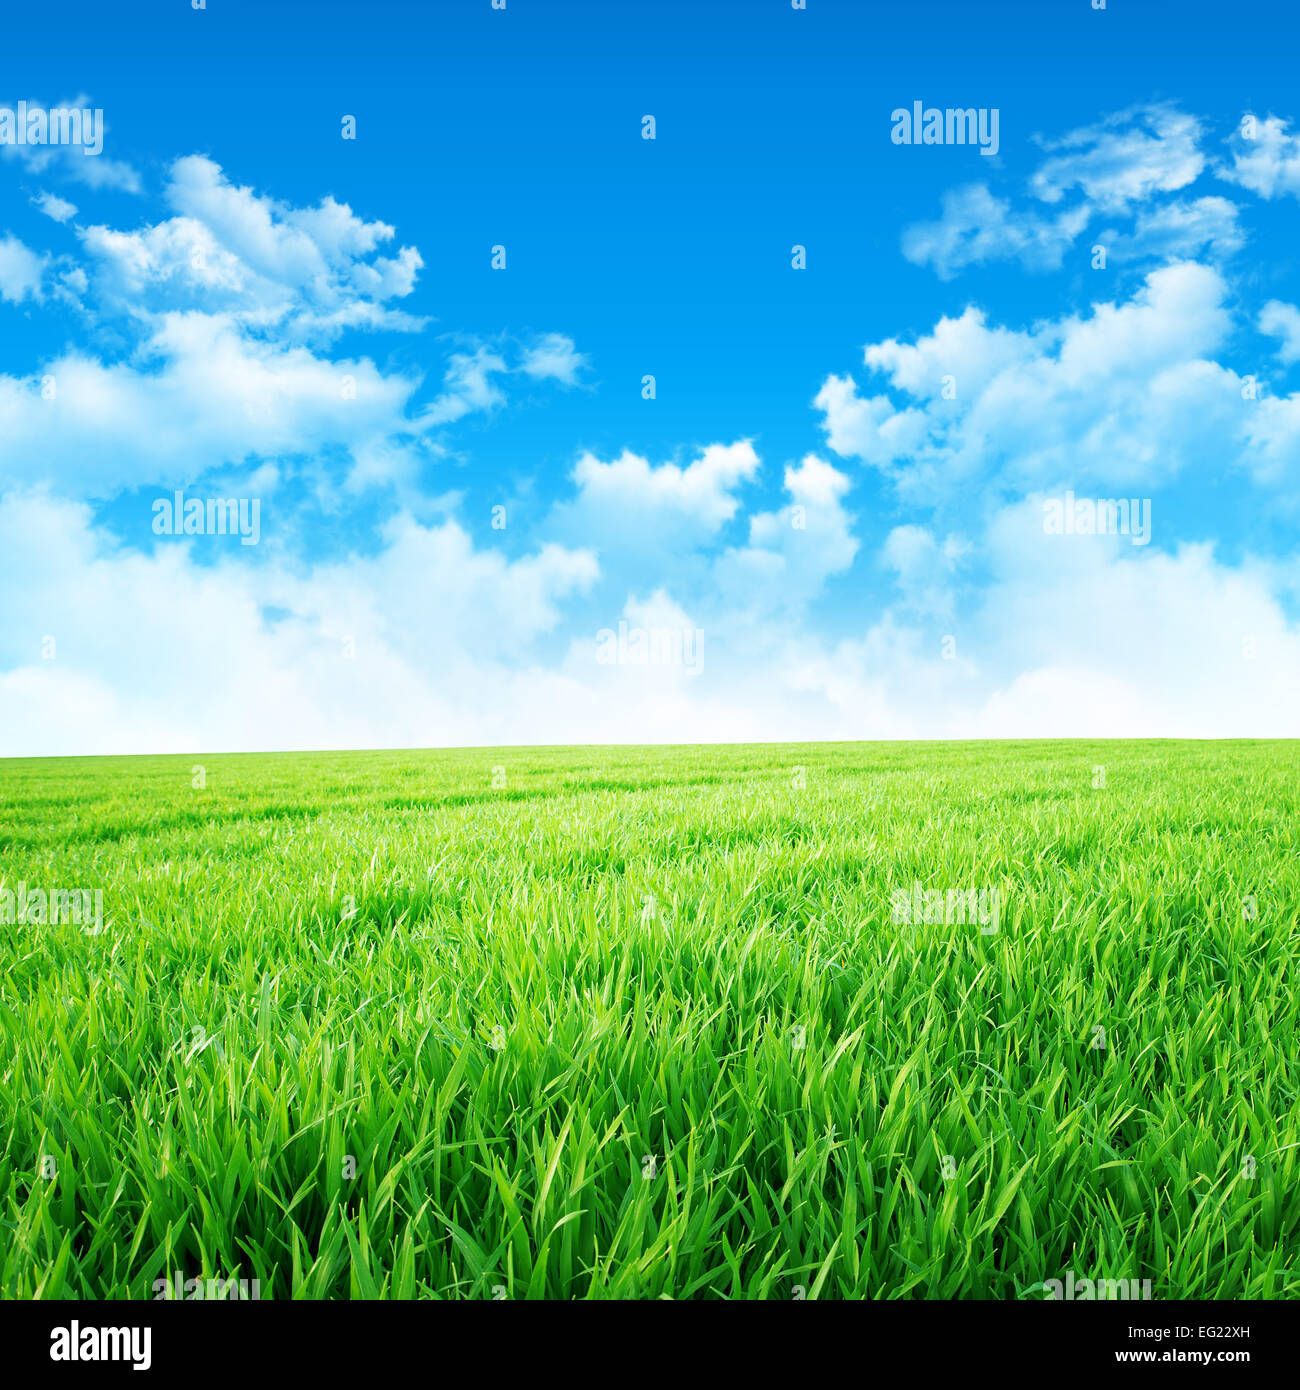 Fresh green grass under a beautiful blue sky with white clouds Stock Photo